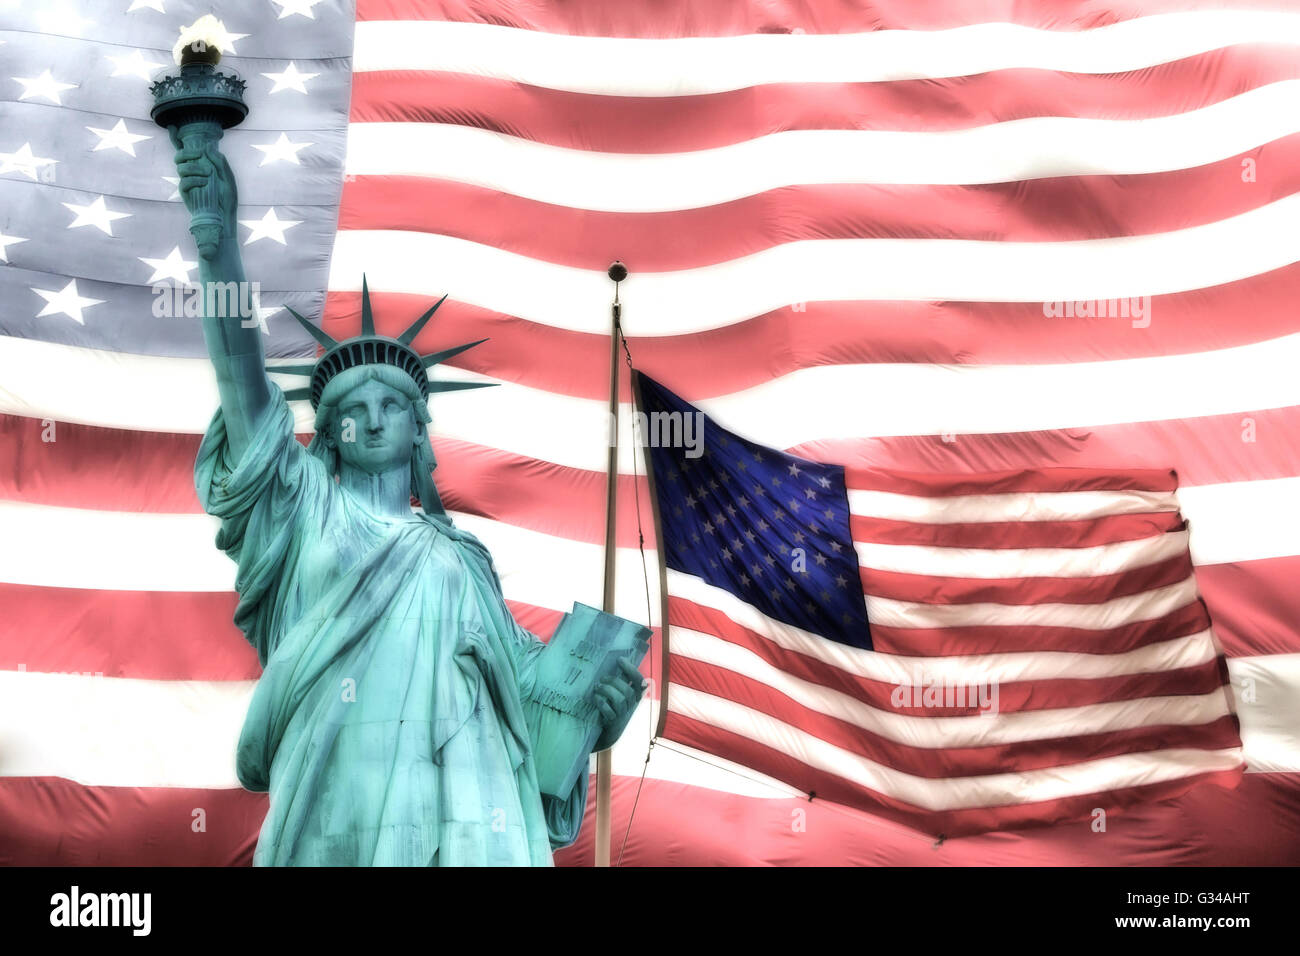 Statue of Liberty and American flag on the mast. The background is made up of a large American flag. Stock Photo